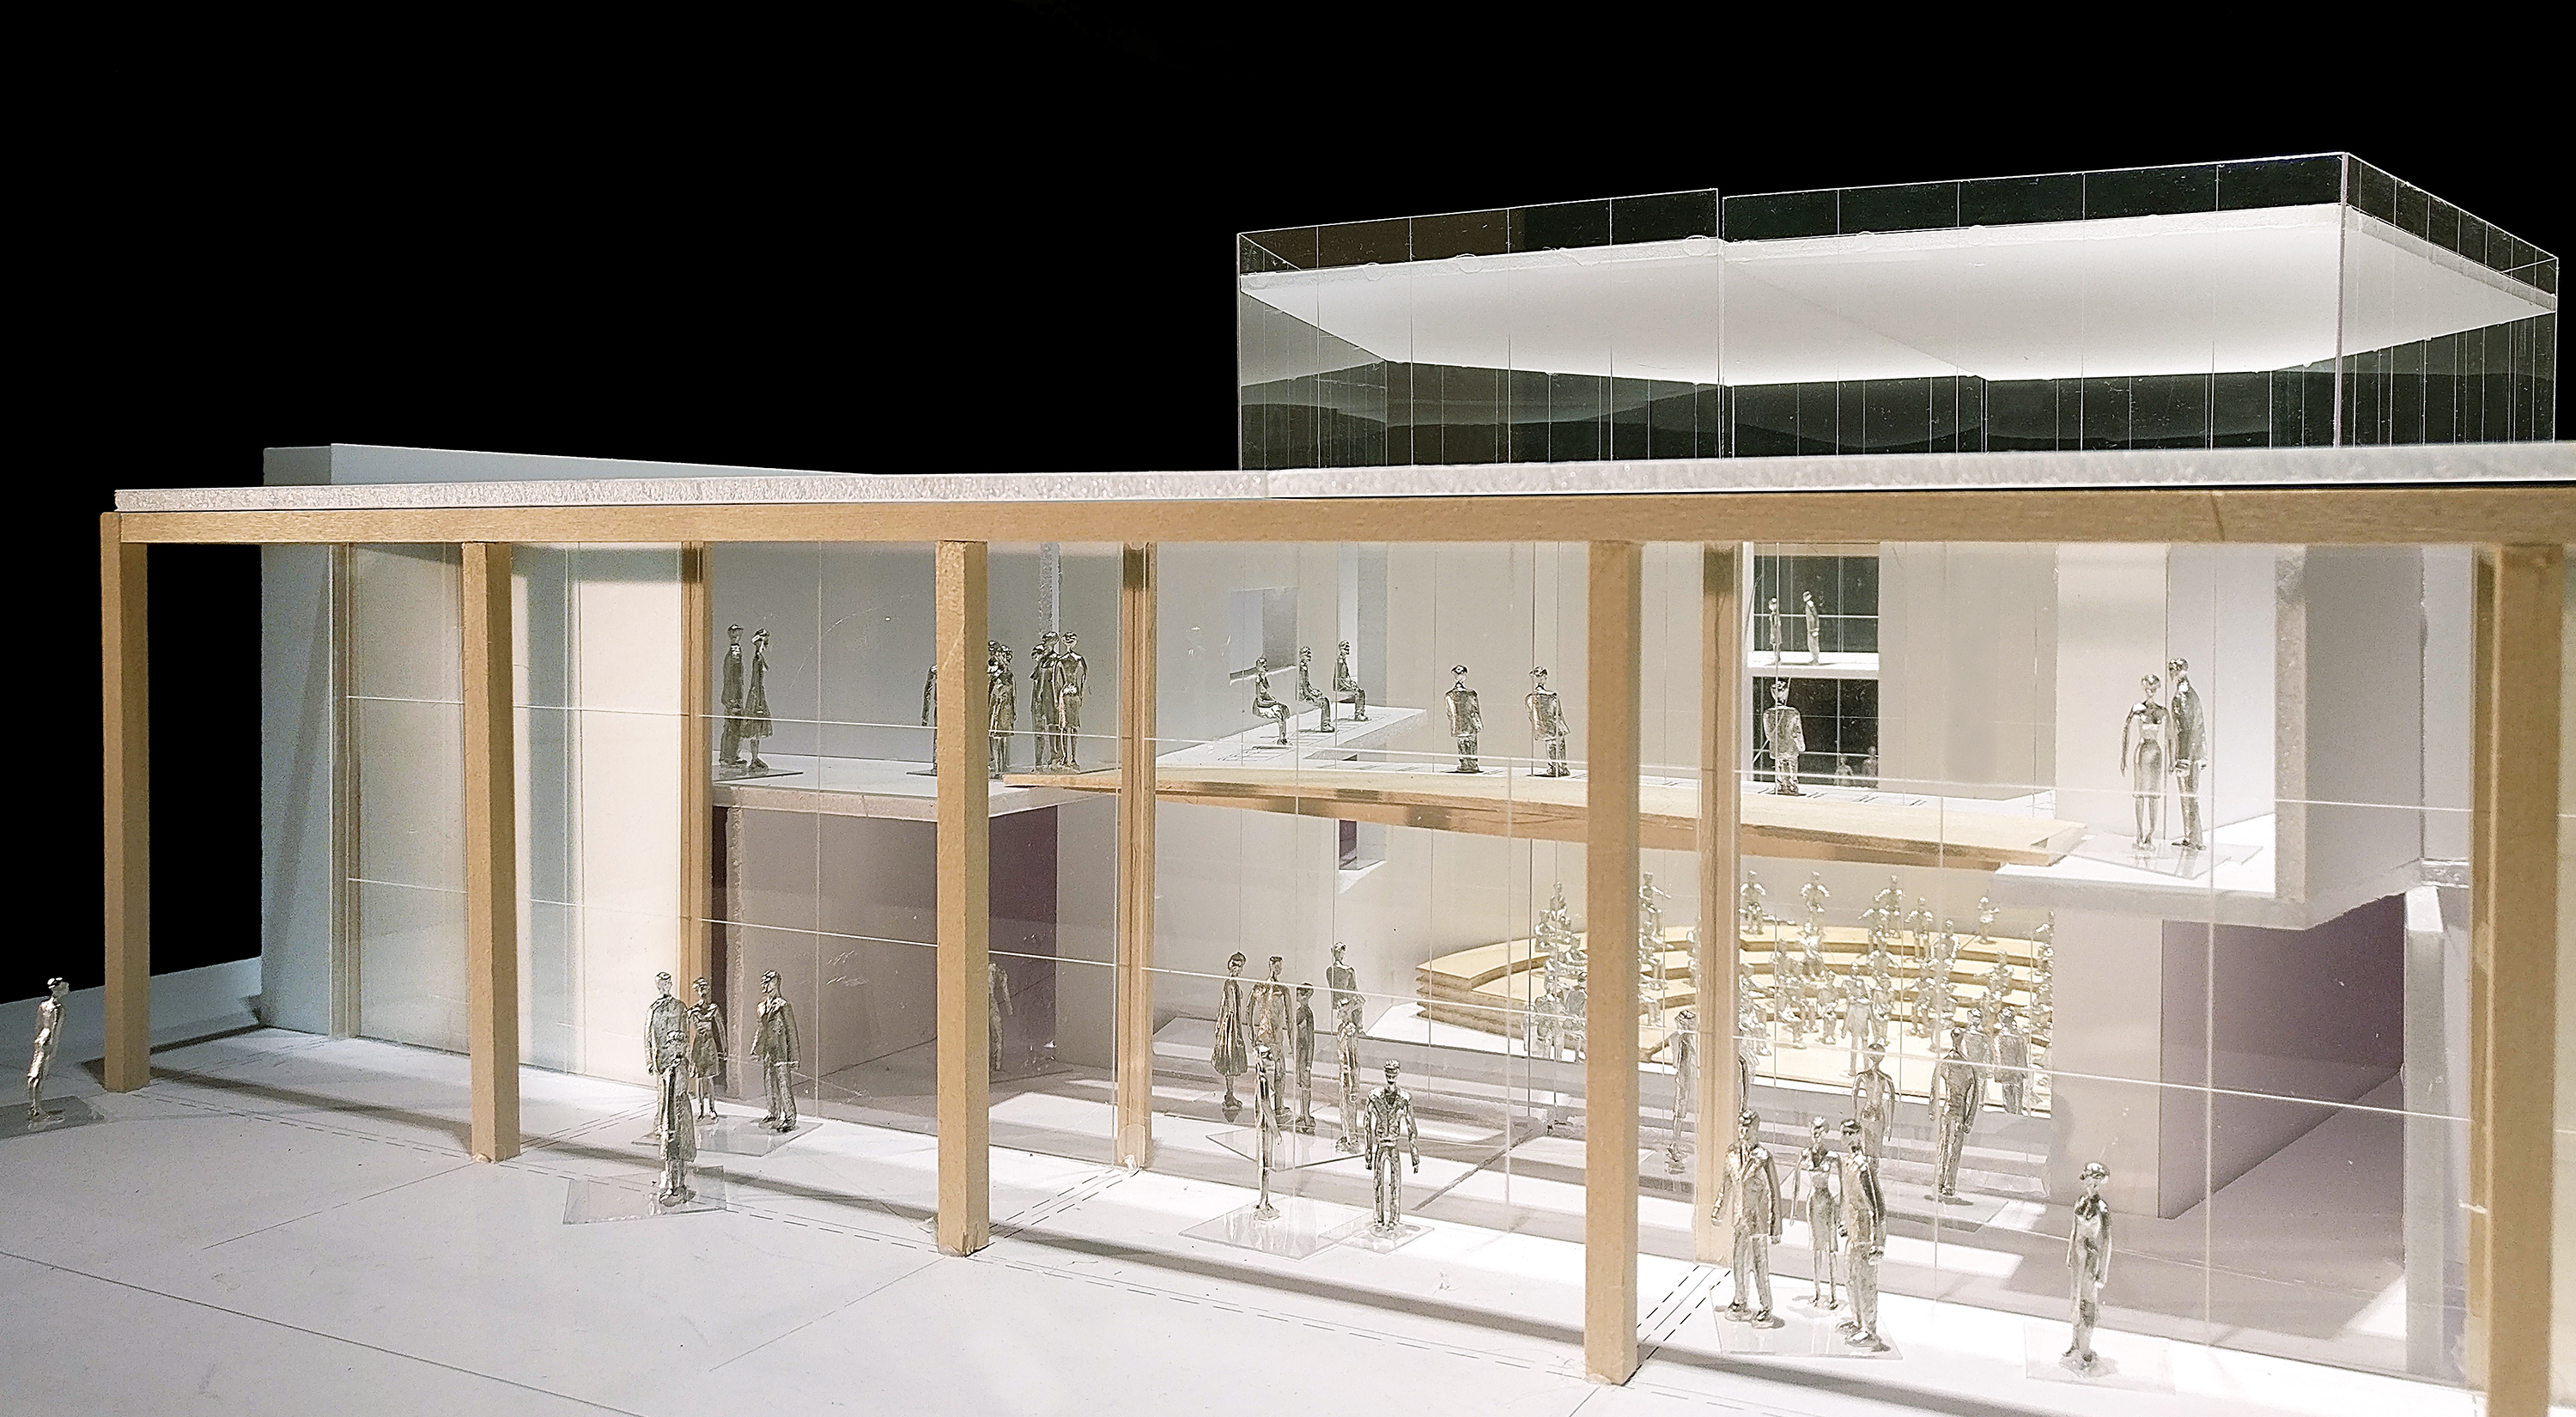 A photo of a 3D model of the music center.